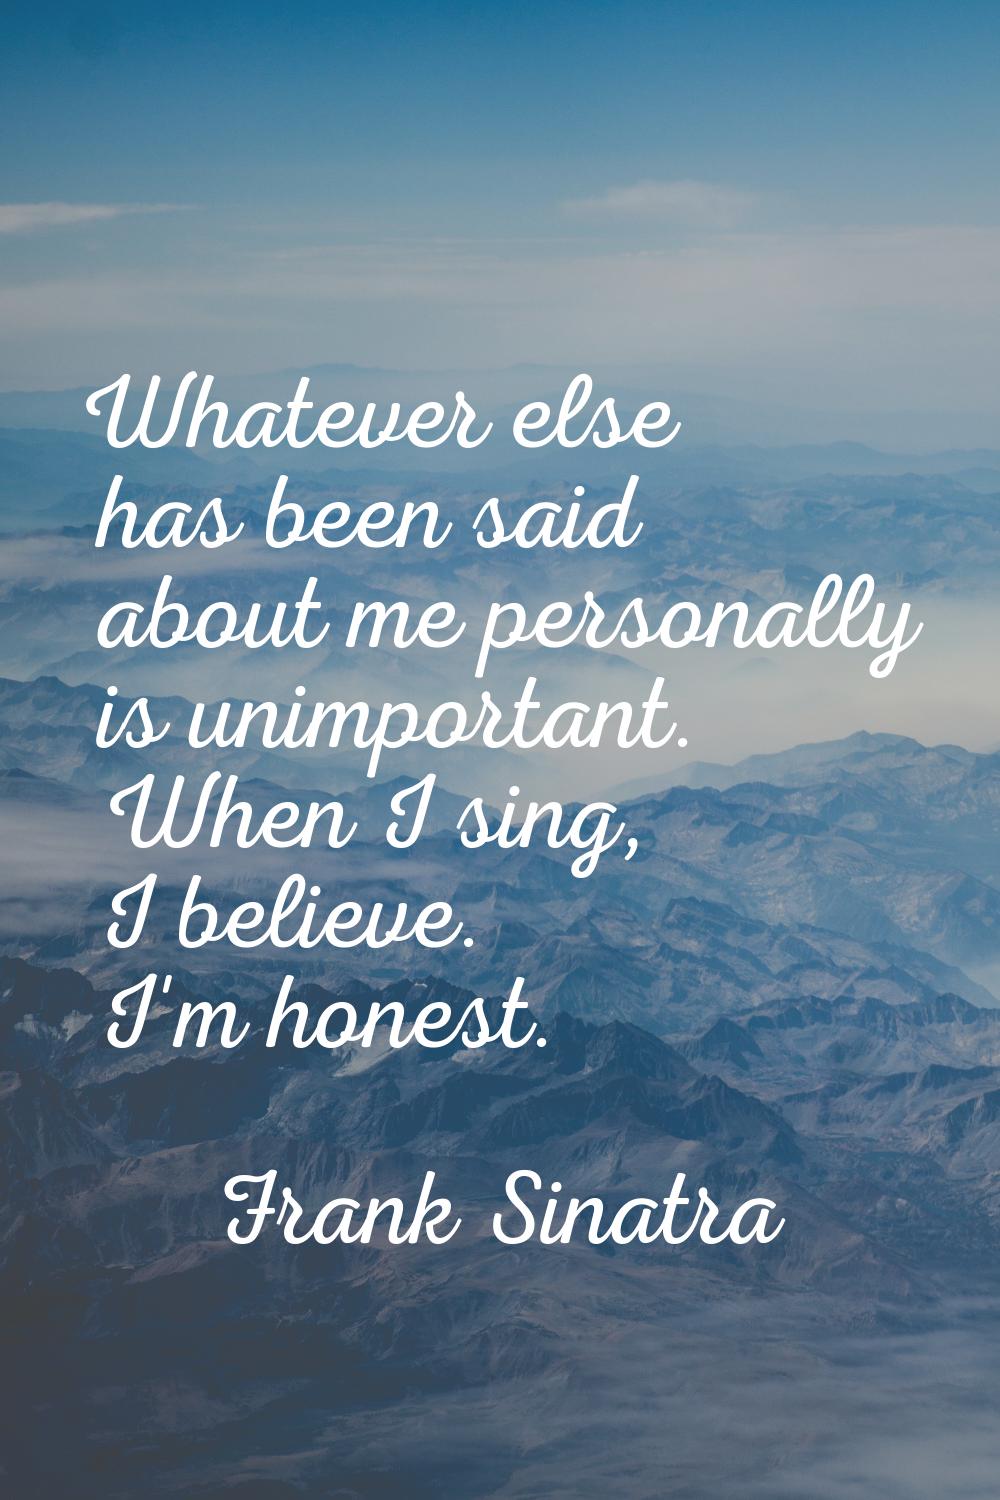 Whatever else has been said about me personally is unimportant. When I sing, I believe. I'm honest.